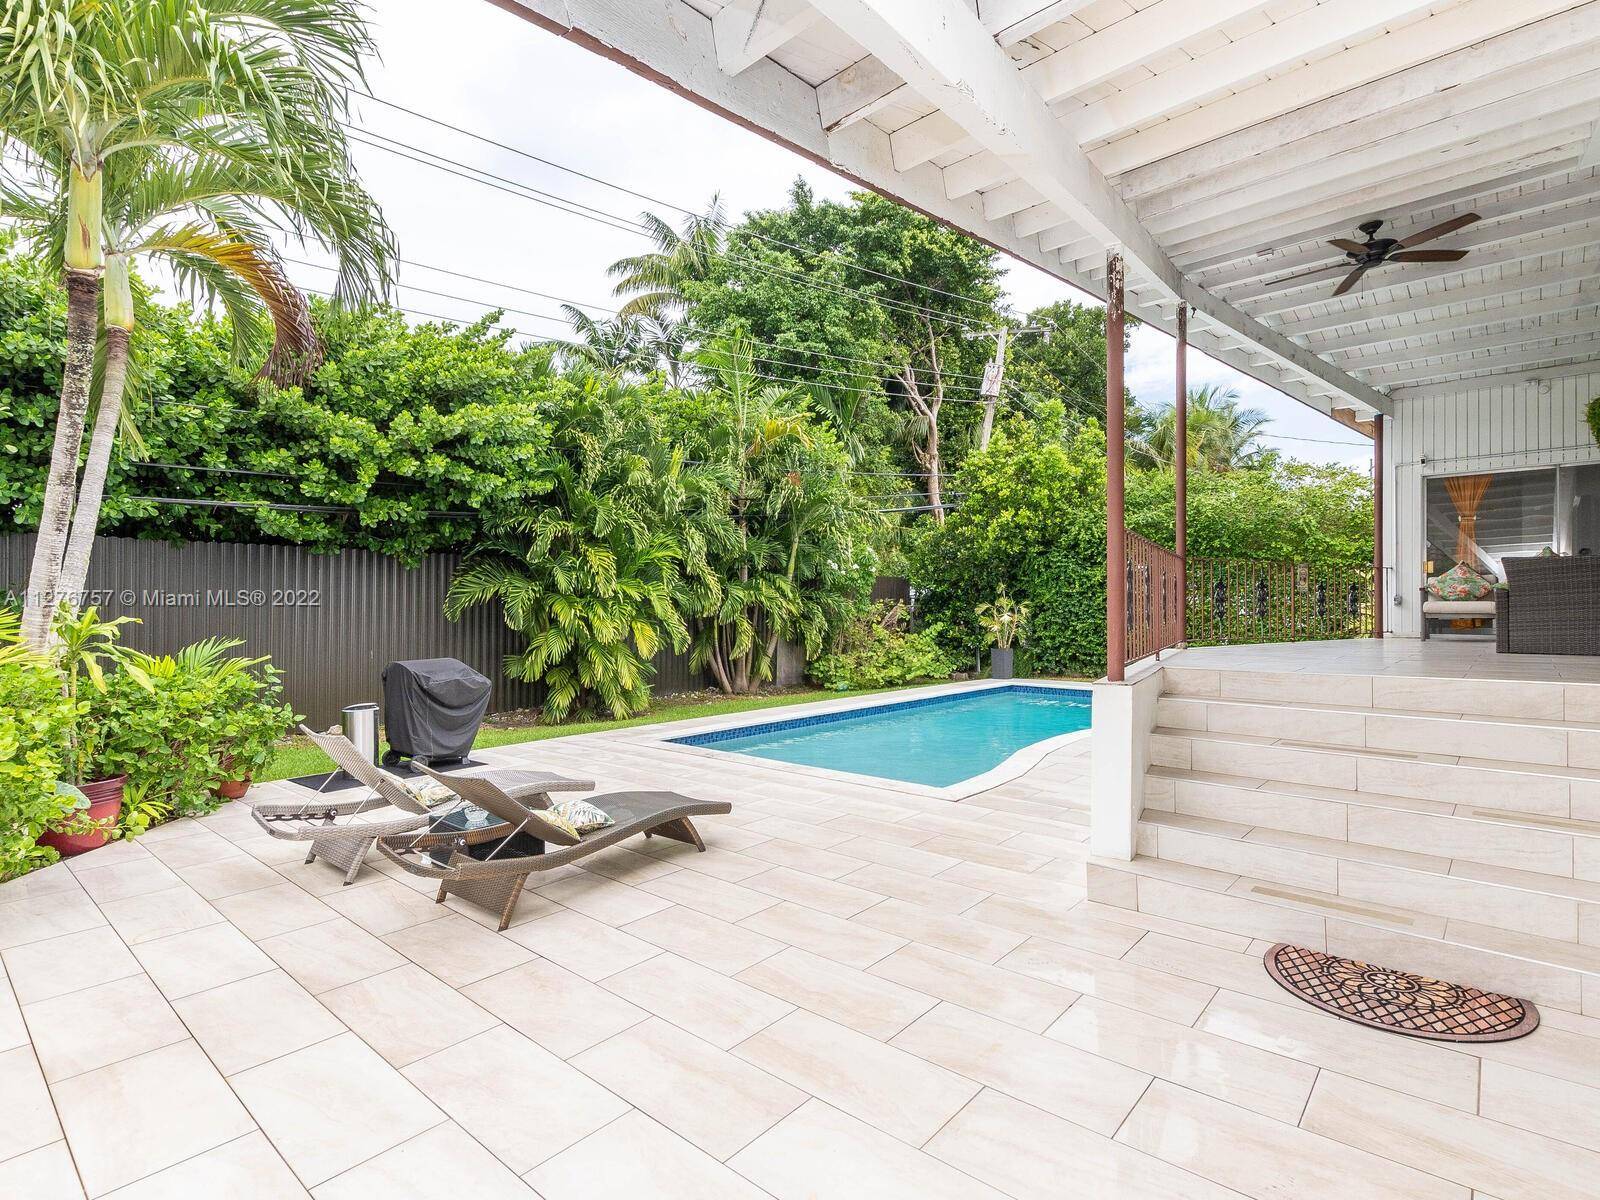 BEAUTIFUL HOUSE FOR LONG TERM RENT IN THE MOST WORTHWHILE AREA OF MIAMI DADE !